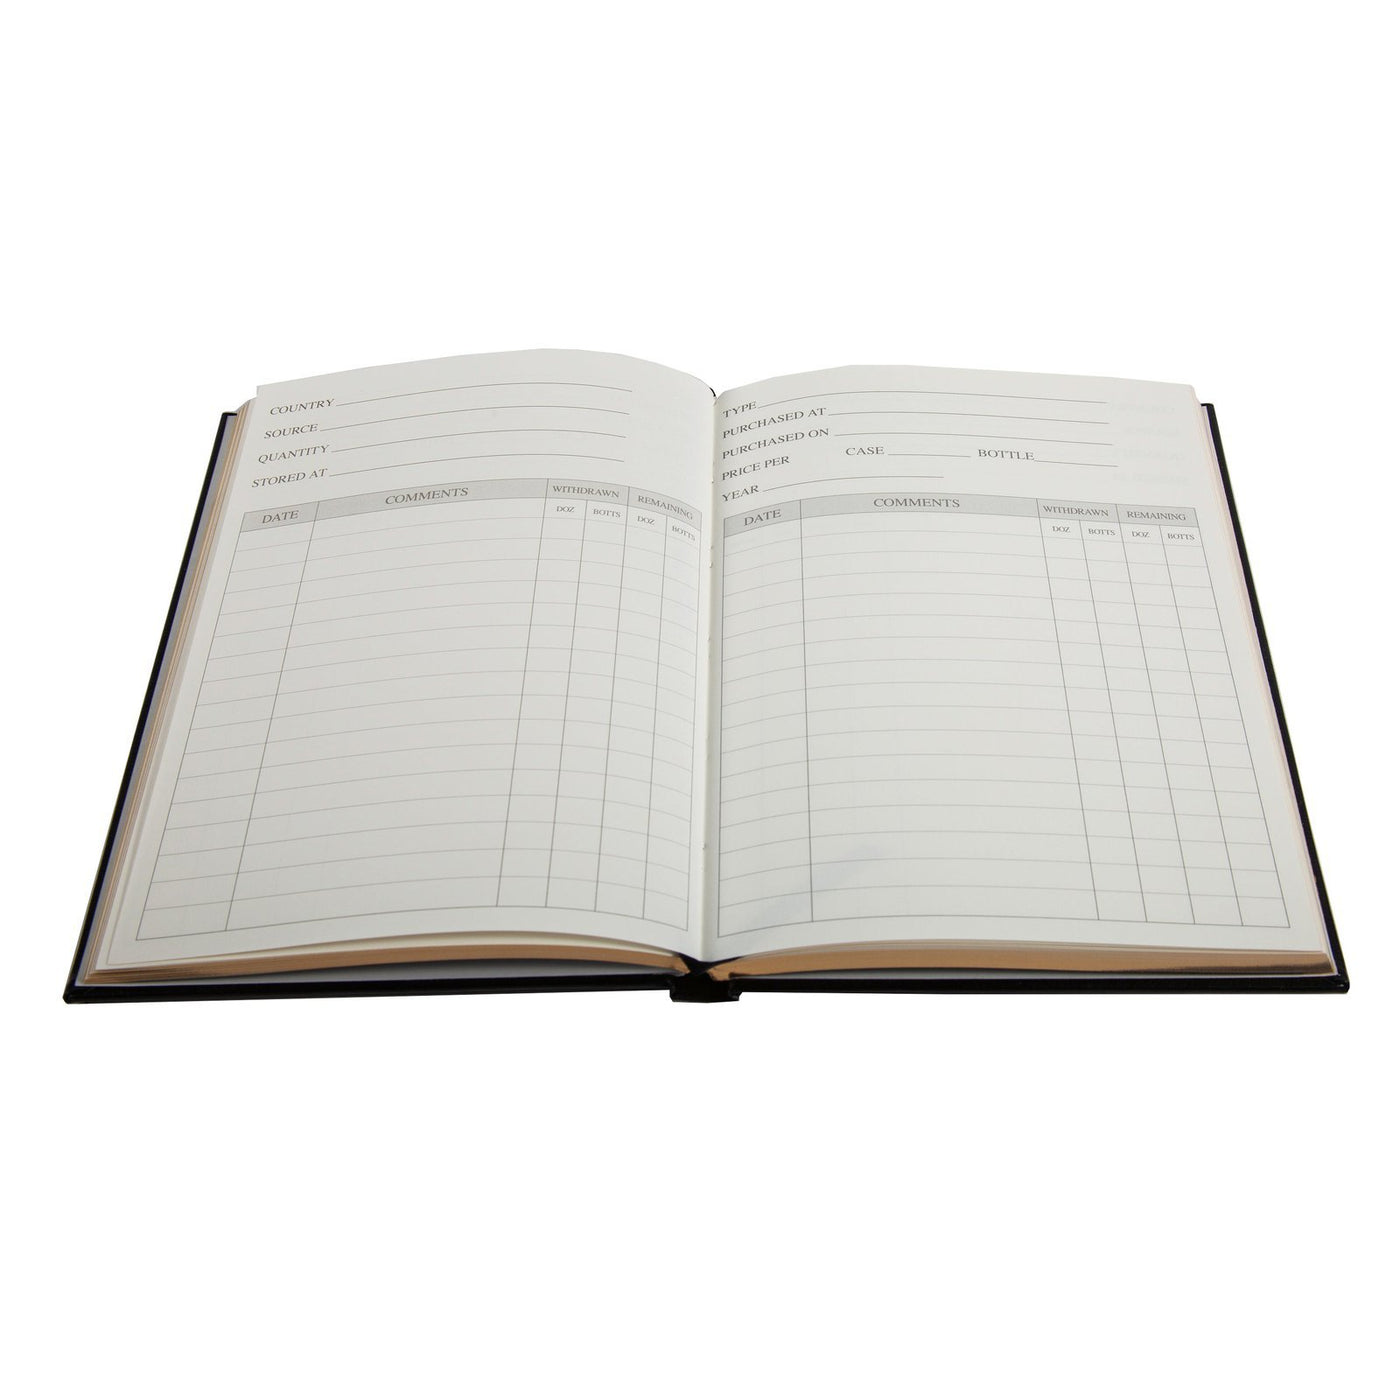 wine cellar log book pages